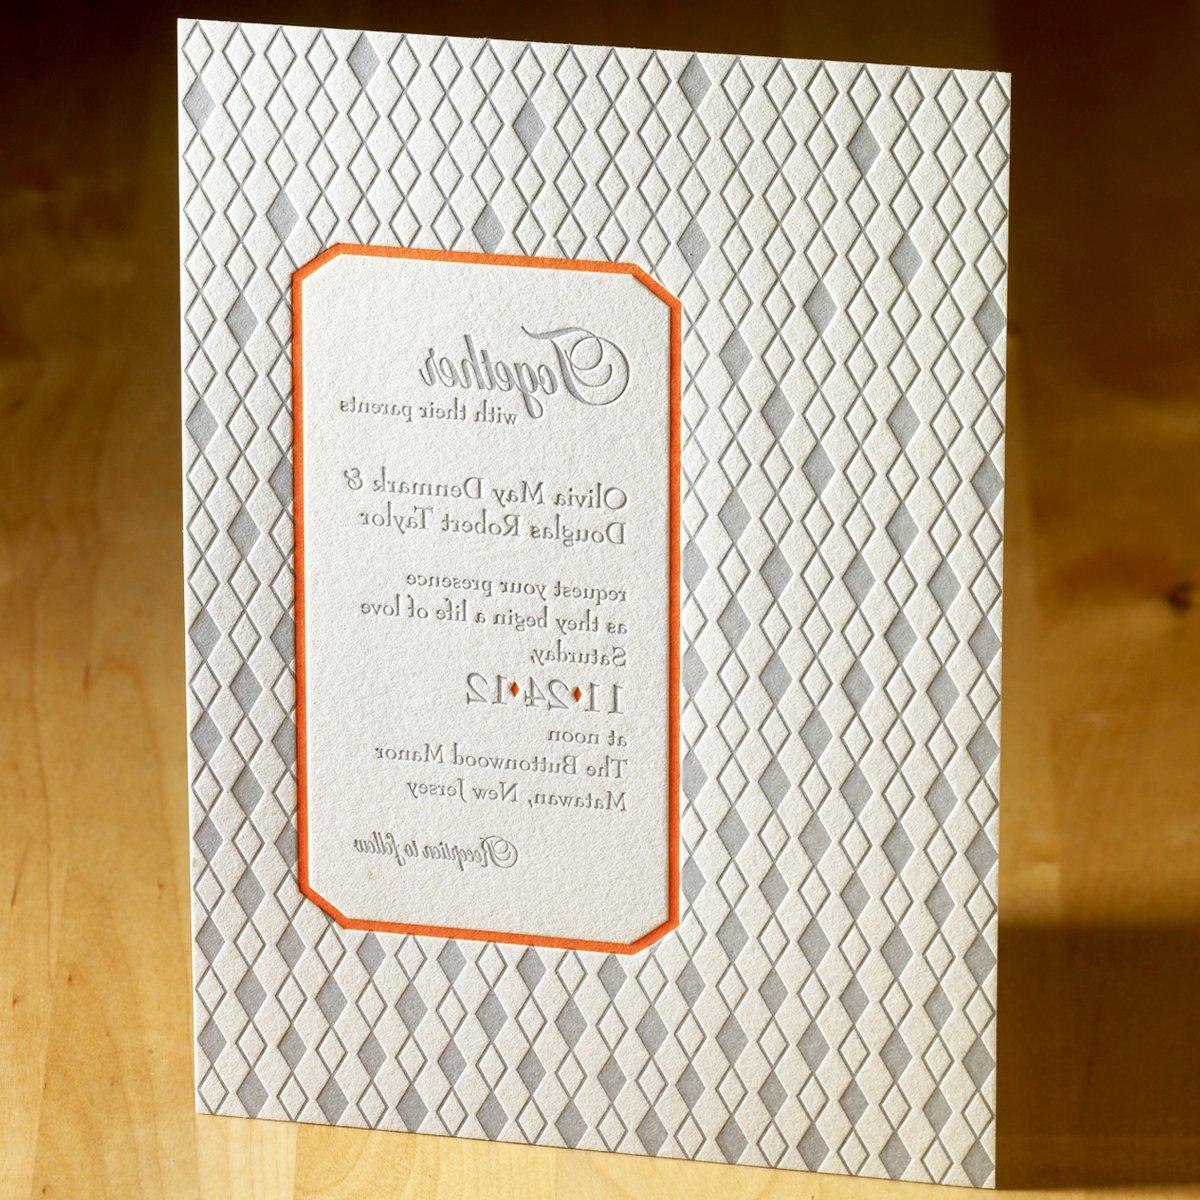 This remarkable letterpress wedding invitation features a mesmerizing